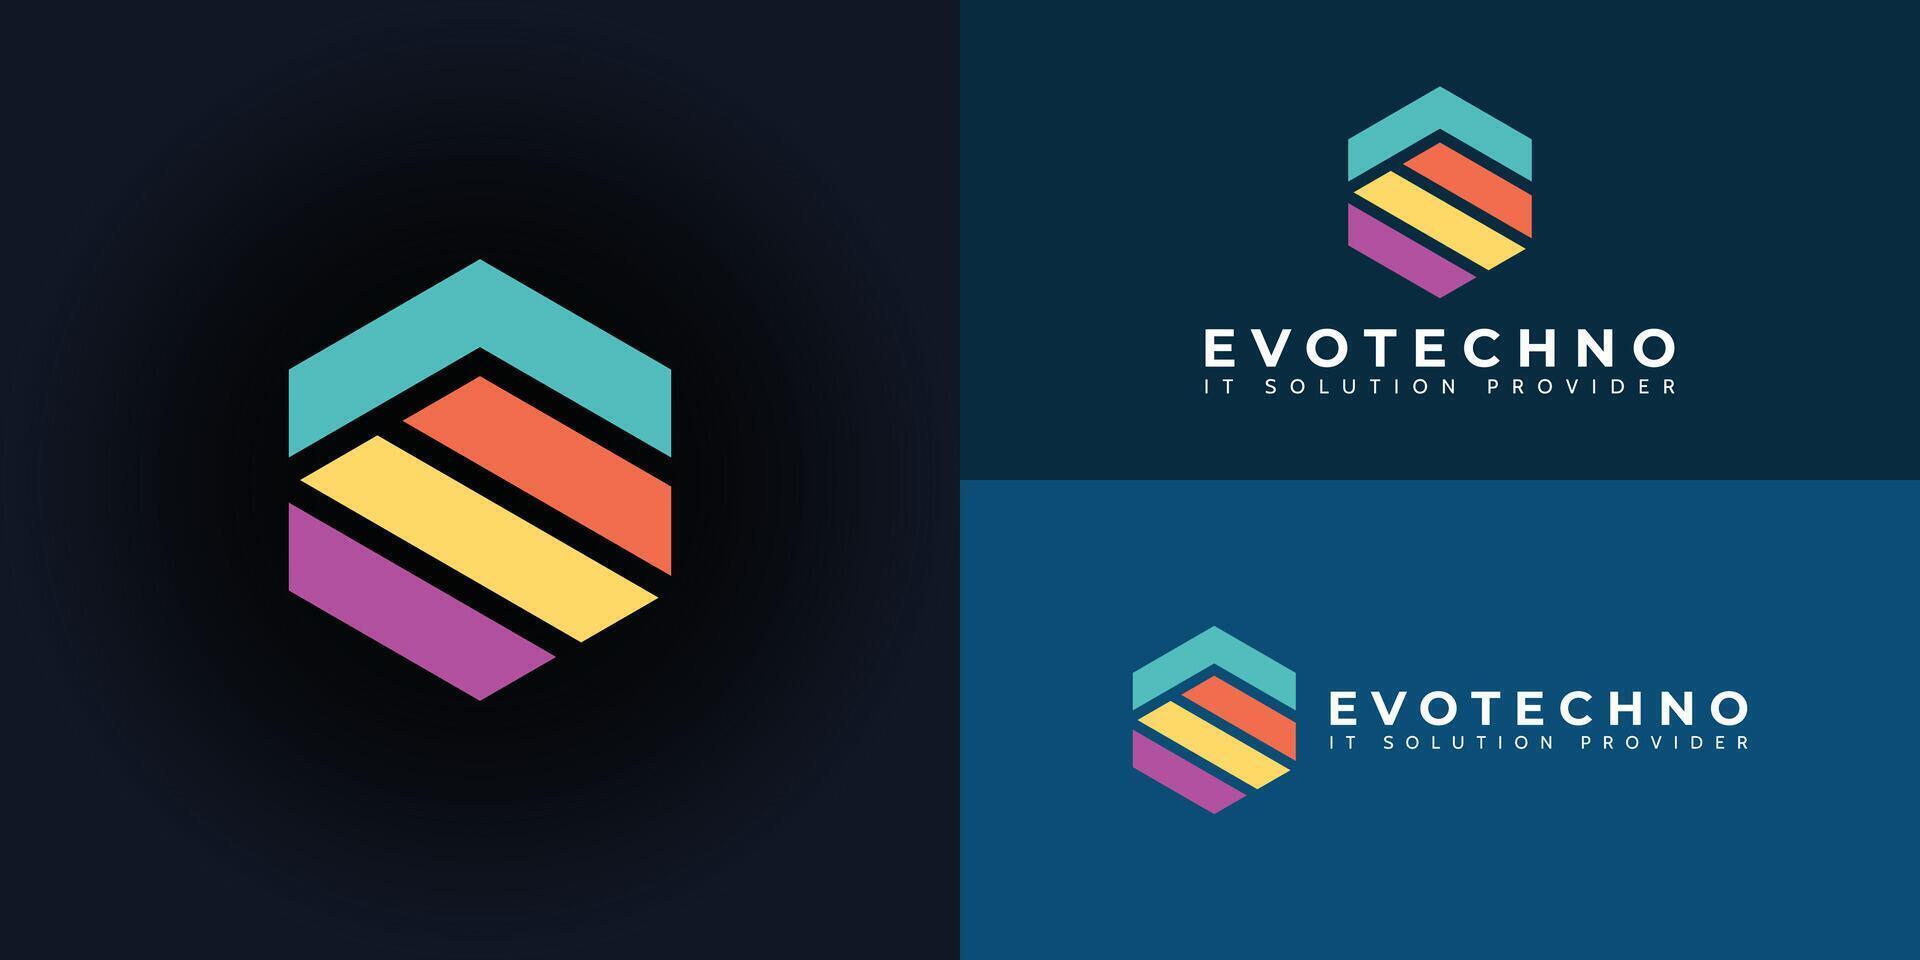 abstract initial letter ET or TE logo in a hexagon shape in blue, orange, yellow, and violet color isolated on multiple background colors. The logo is suitable for IT provider solution logo design vector